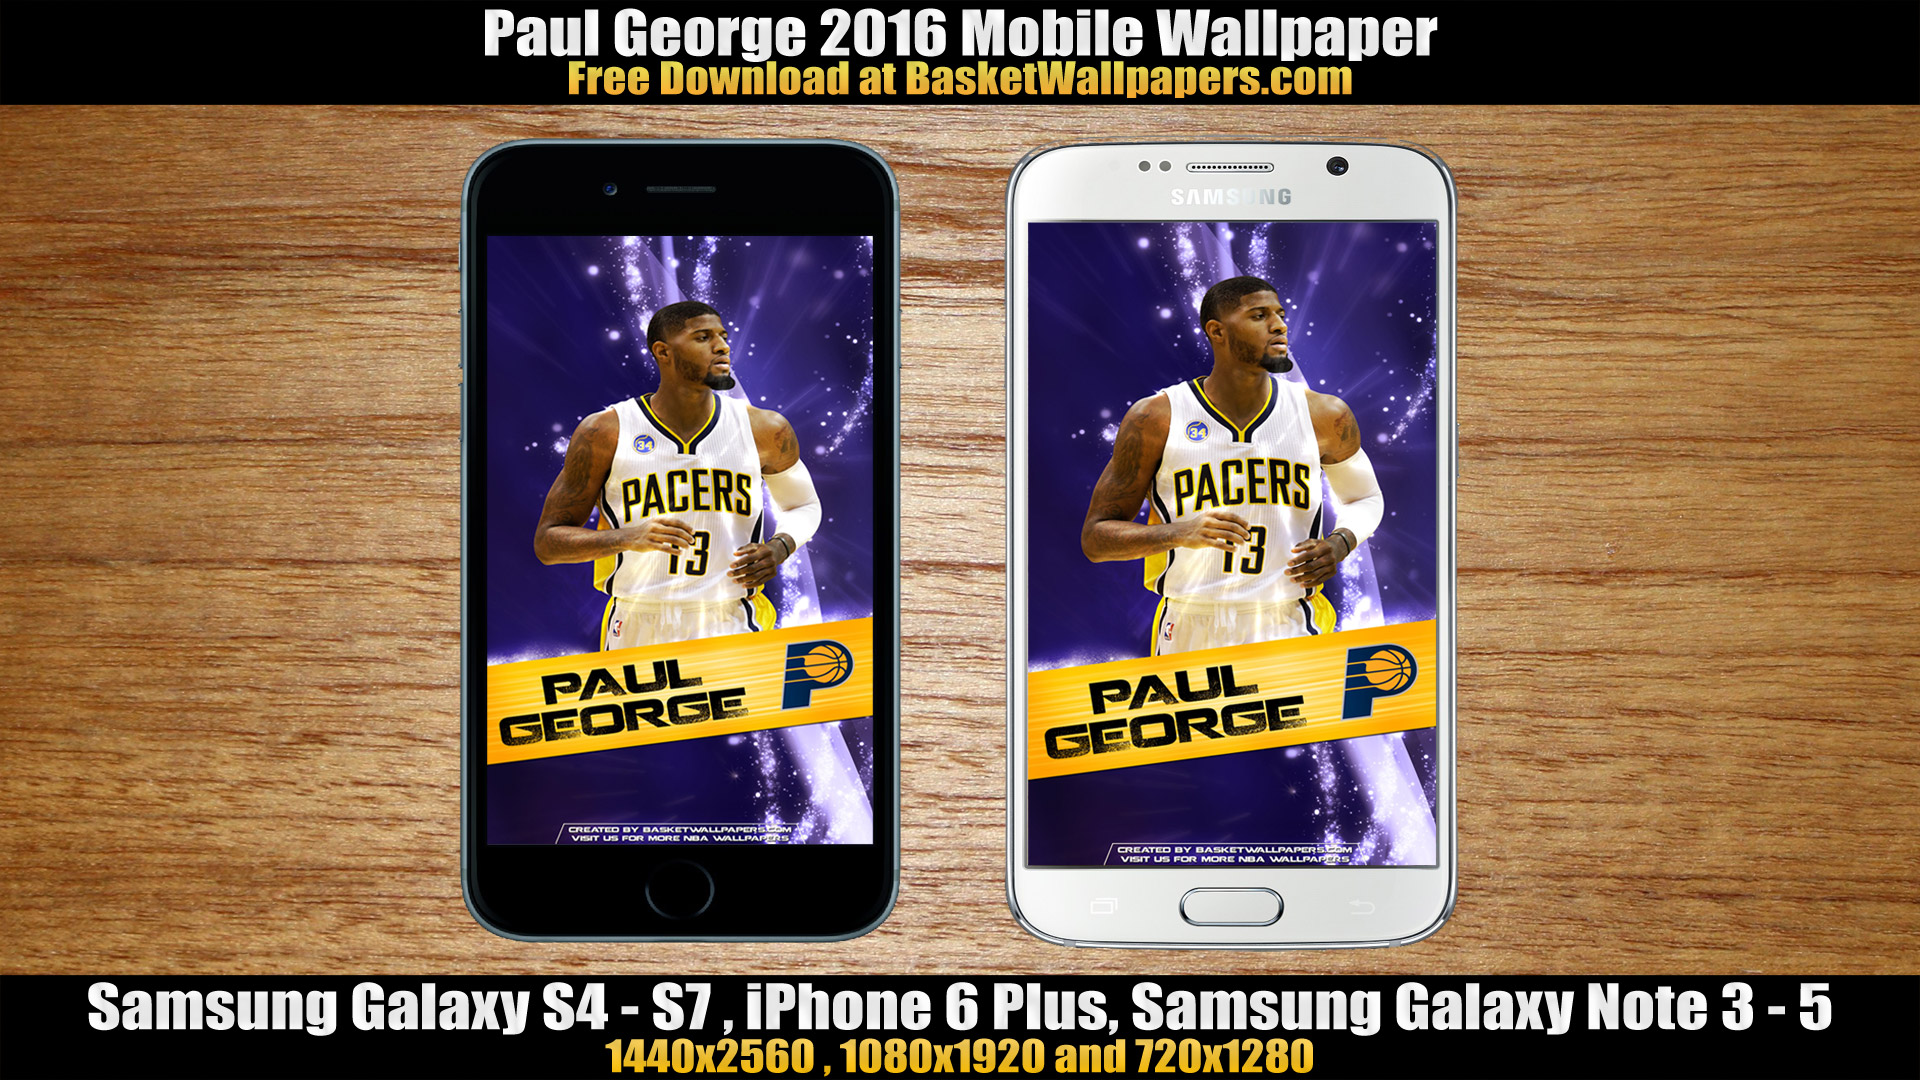 Paul George Indiana Pacers 2016 Mobile Wallpaper